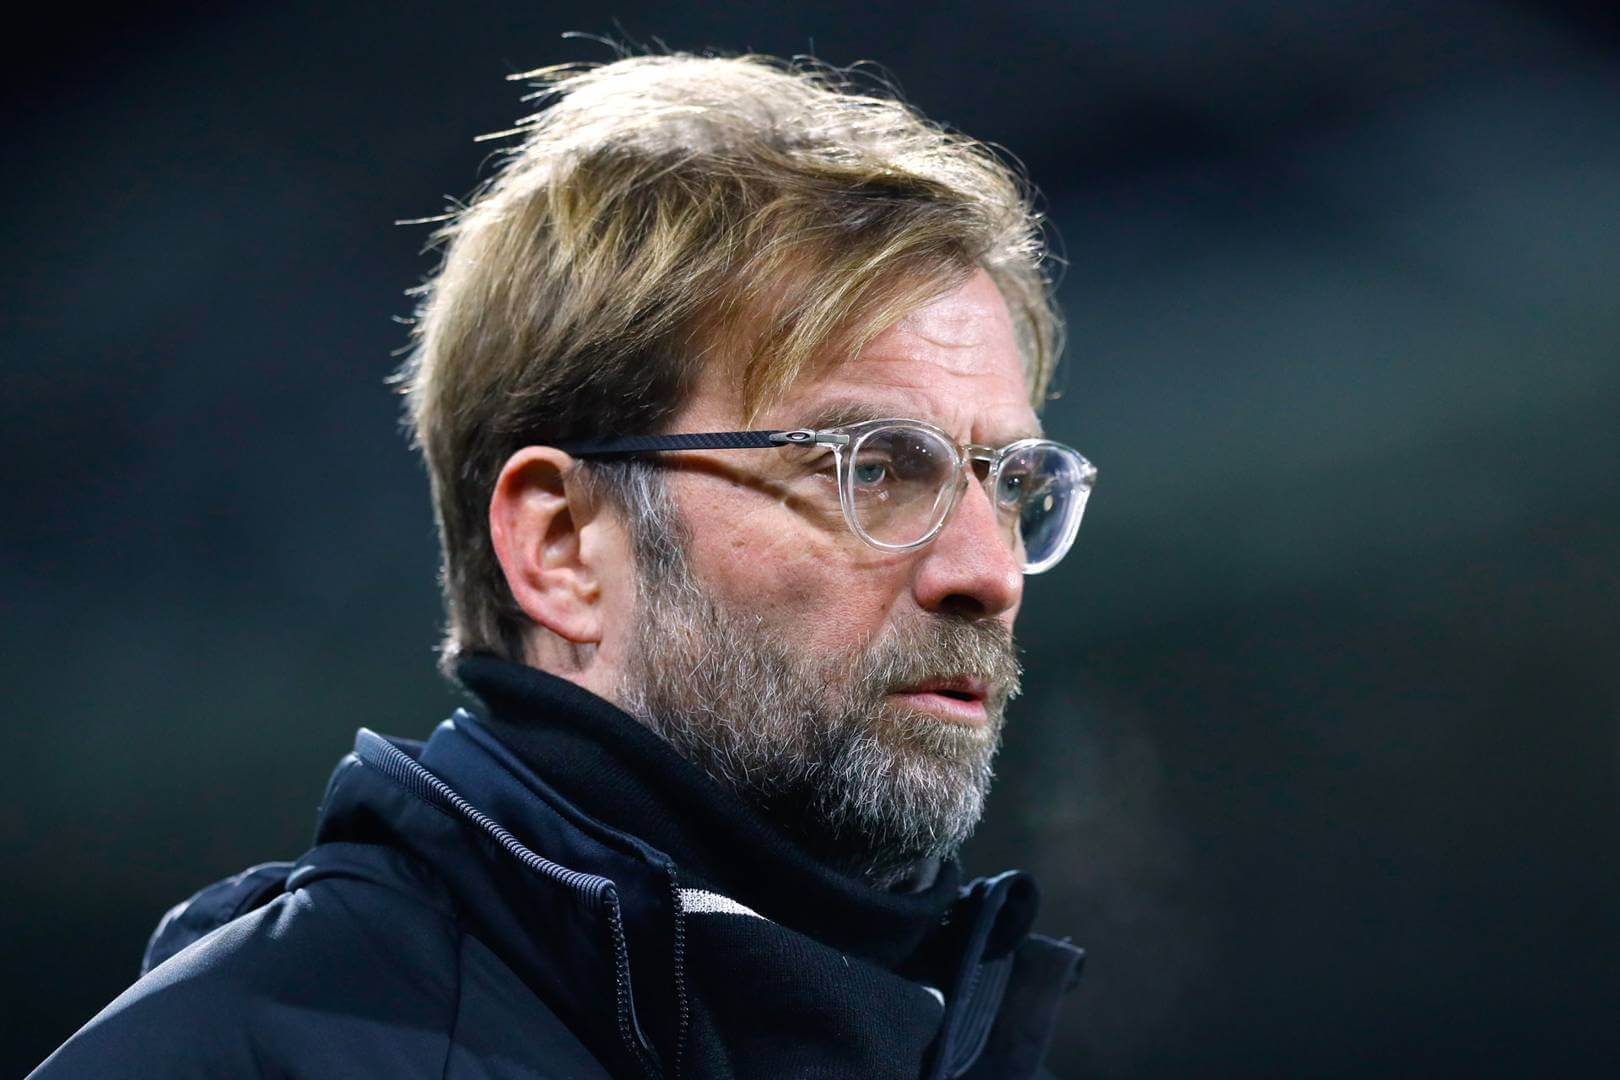 Bayern’s Clash With Liverpool Isn’t Personal For Klopp